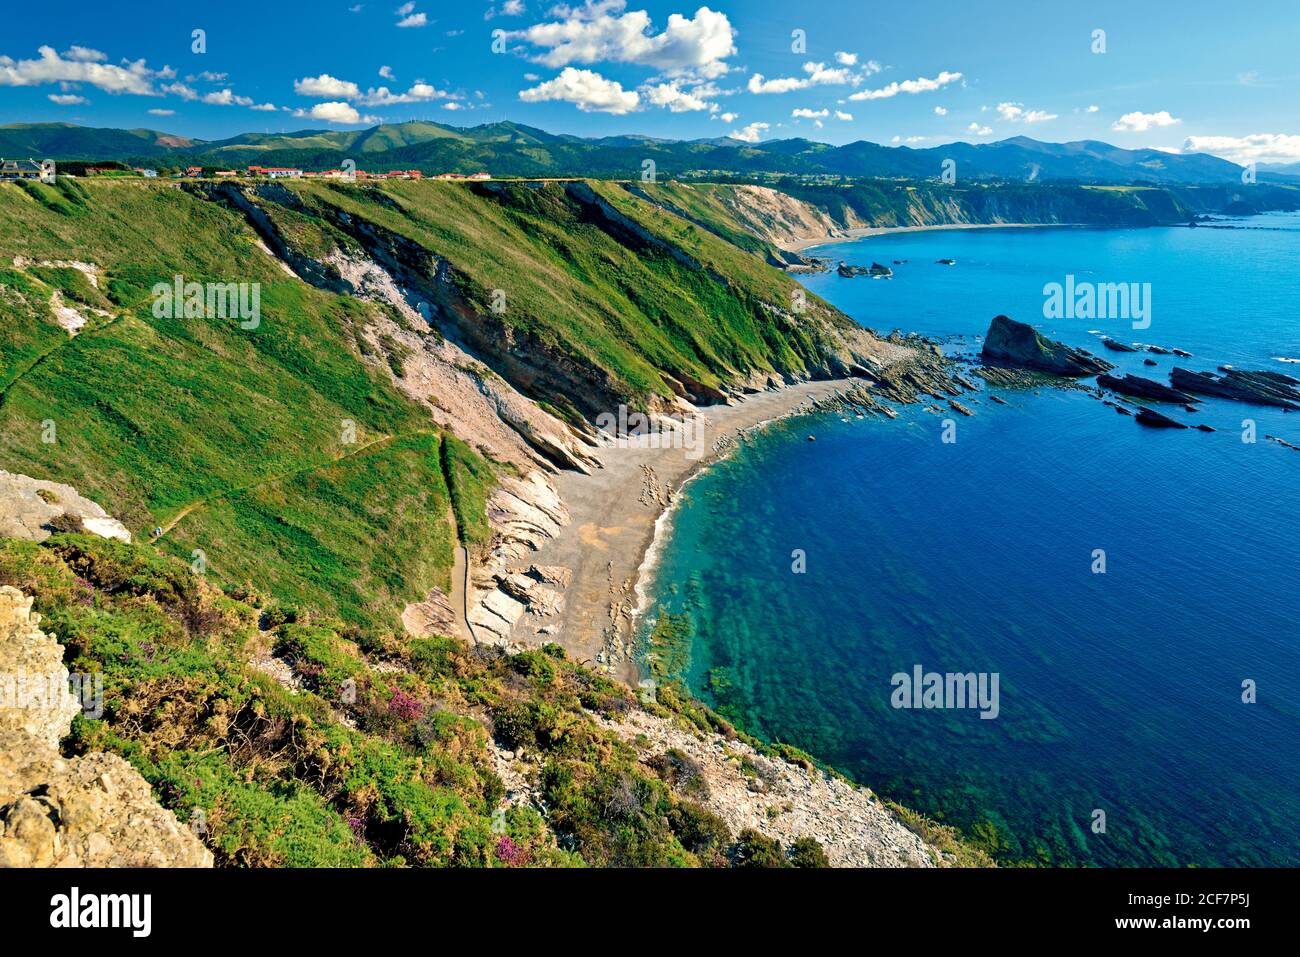 Great seaside view with green cliffs and mountains in the background Stock Photo